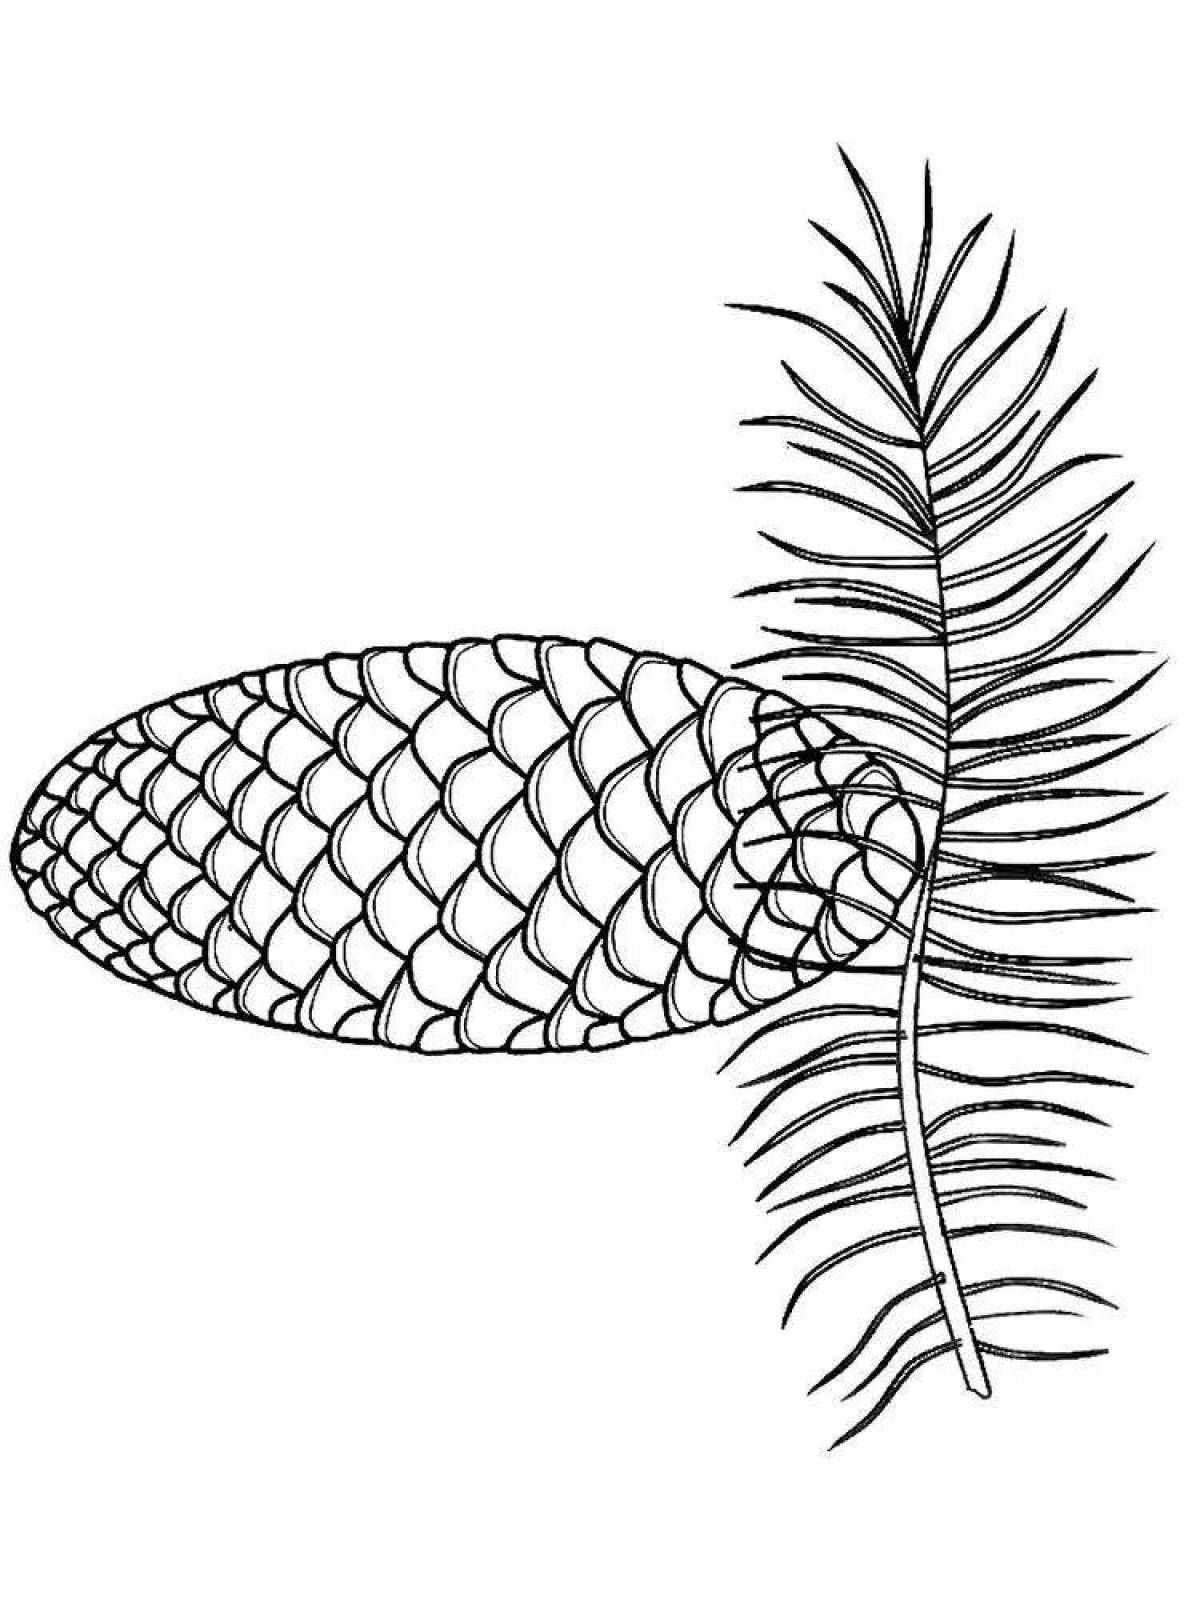 Cone coloring page for kids